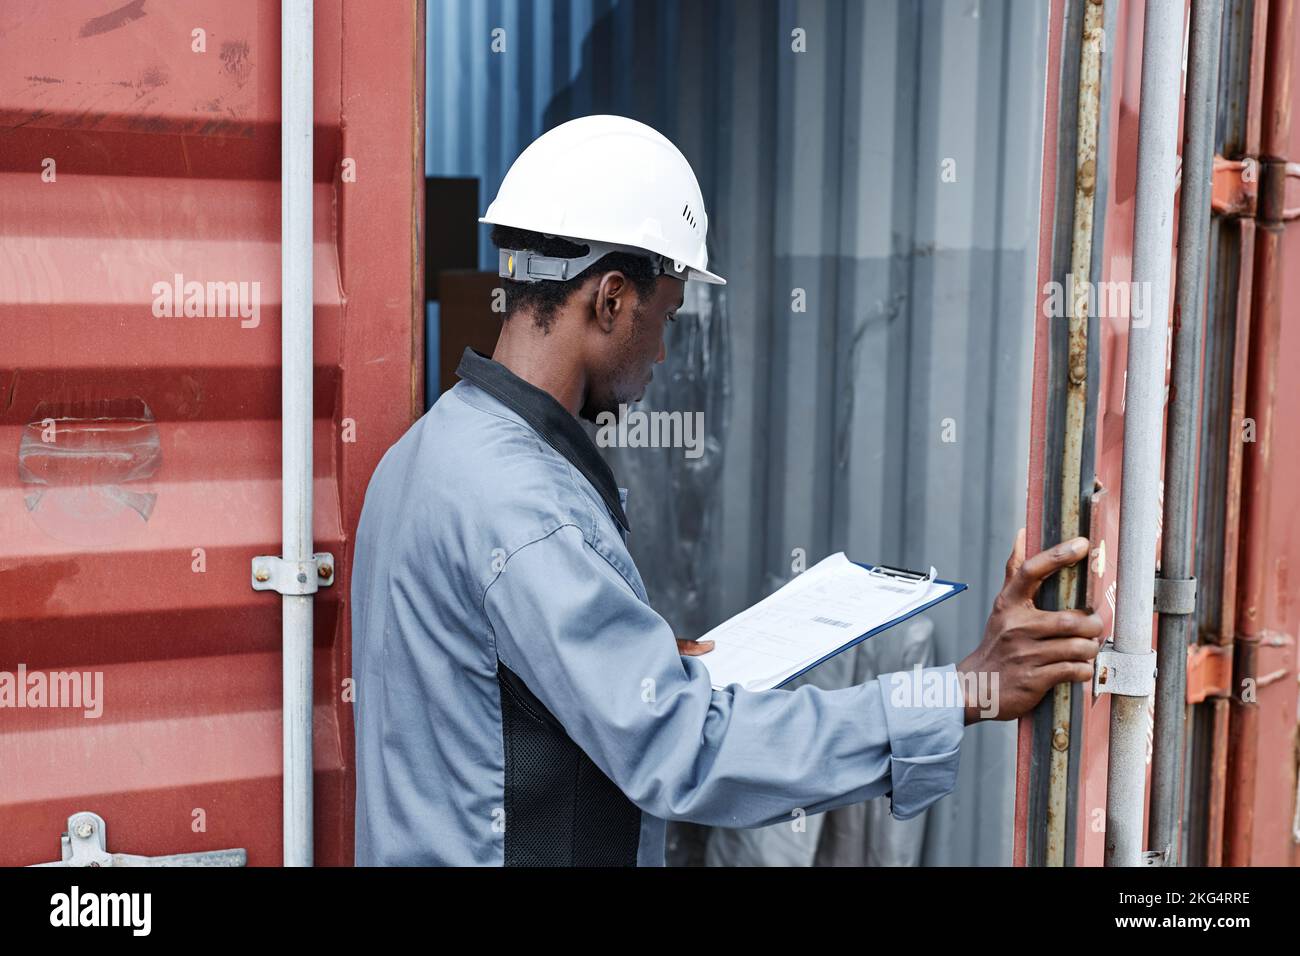 Back view of male worker wearing hardhat while checking containers at shipping dock, copy space Stock Photo